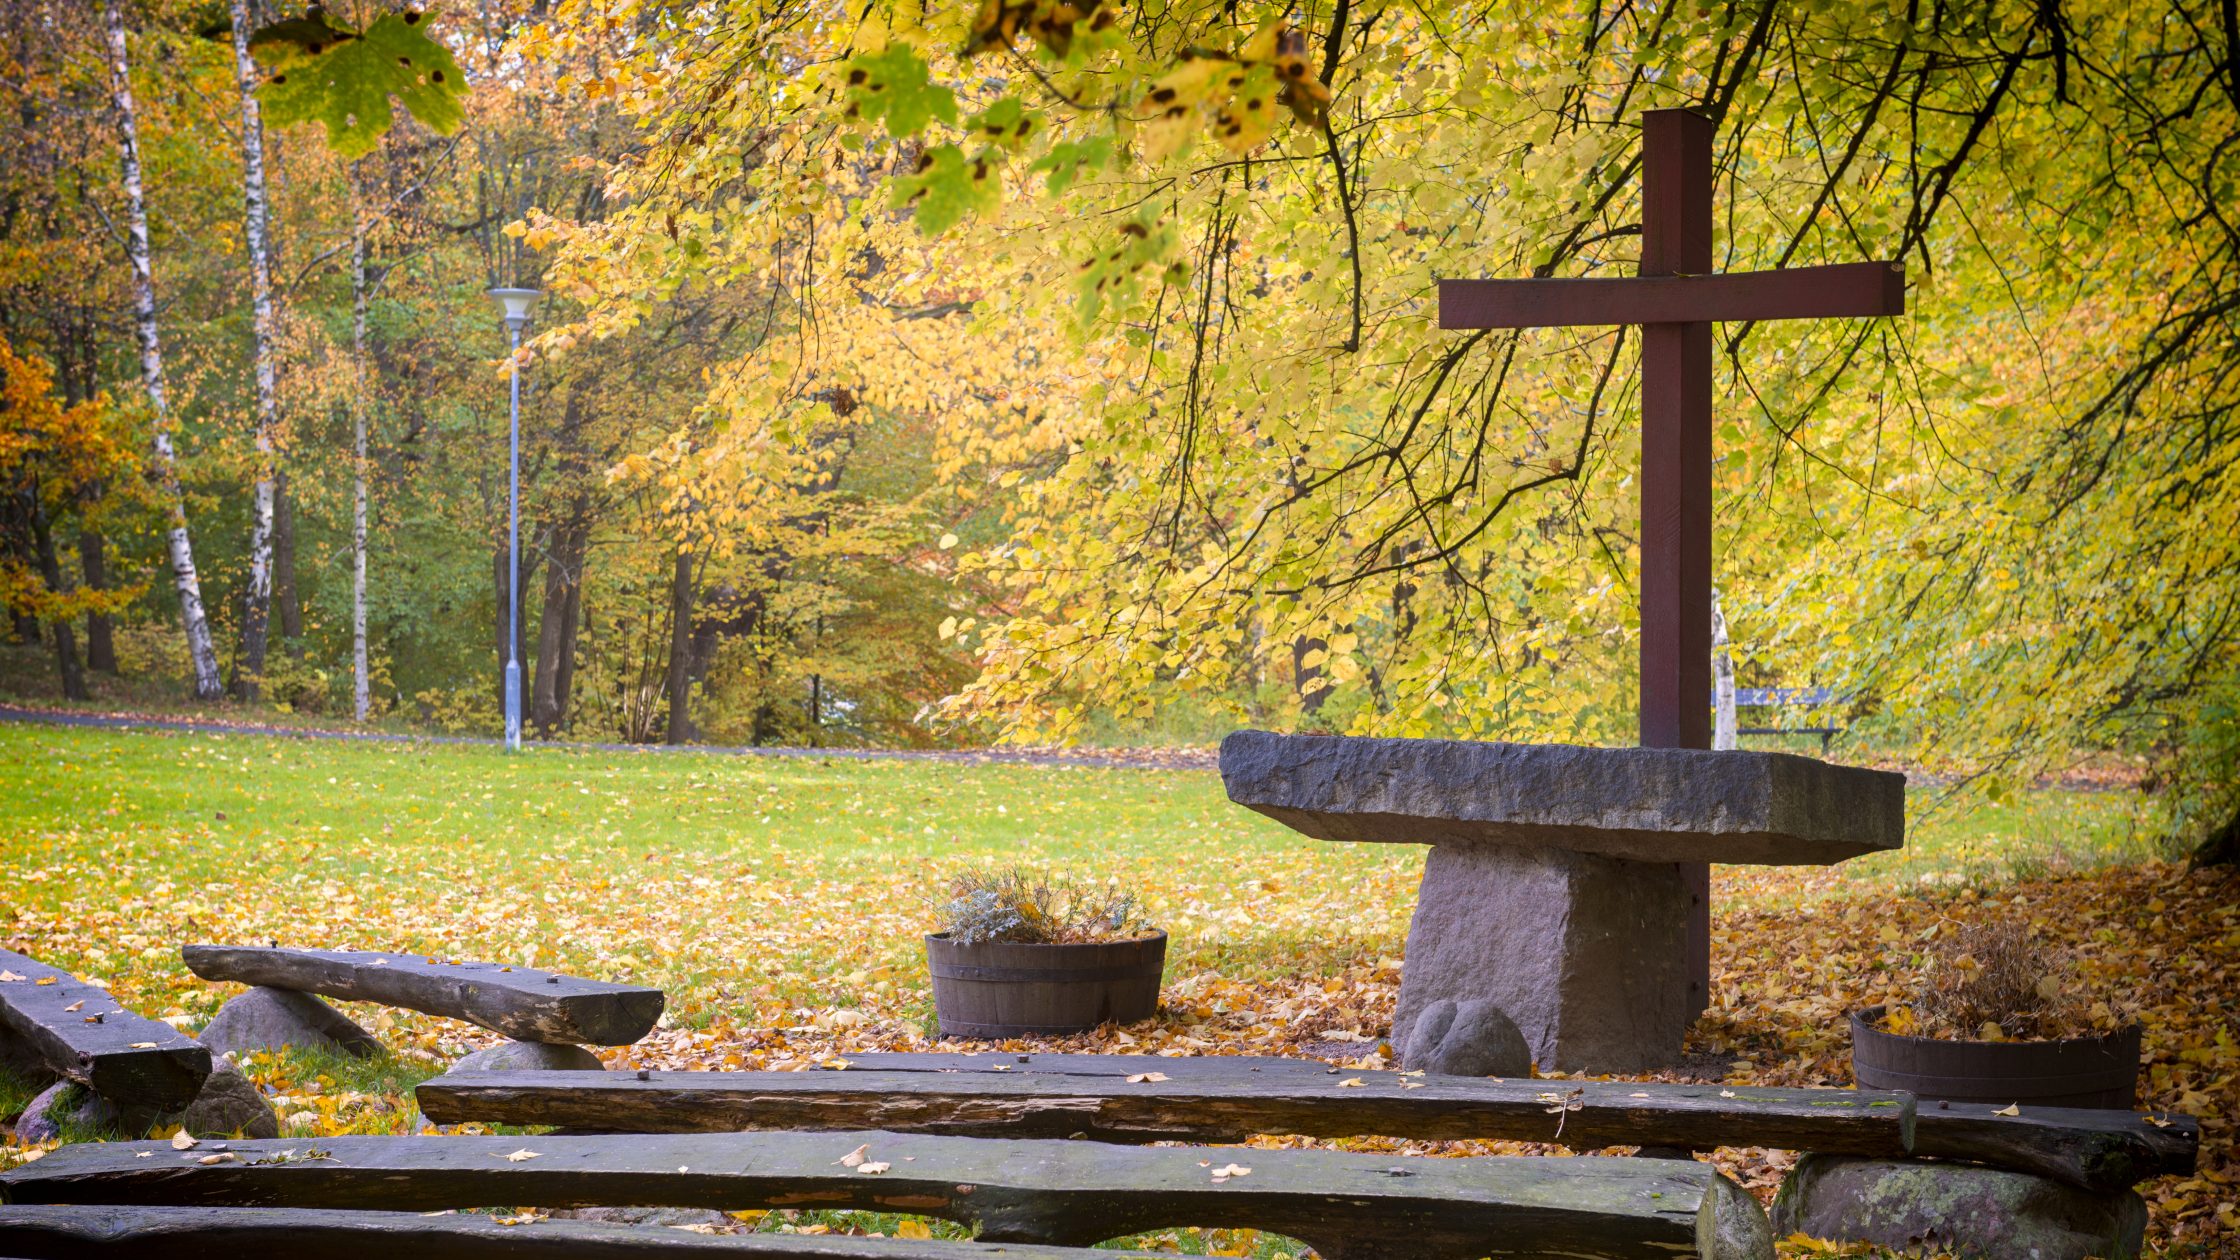 Outdoor church. Wooden seats in front of a stone altar with a red cross.